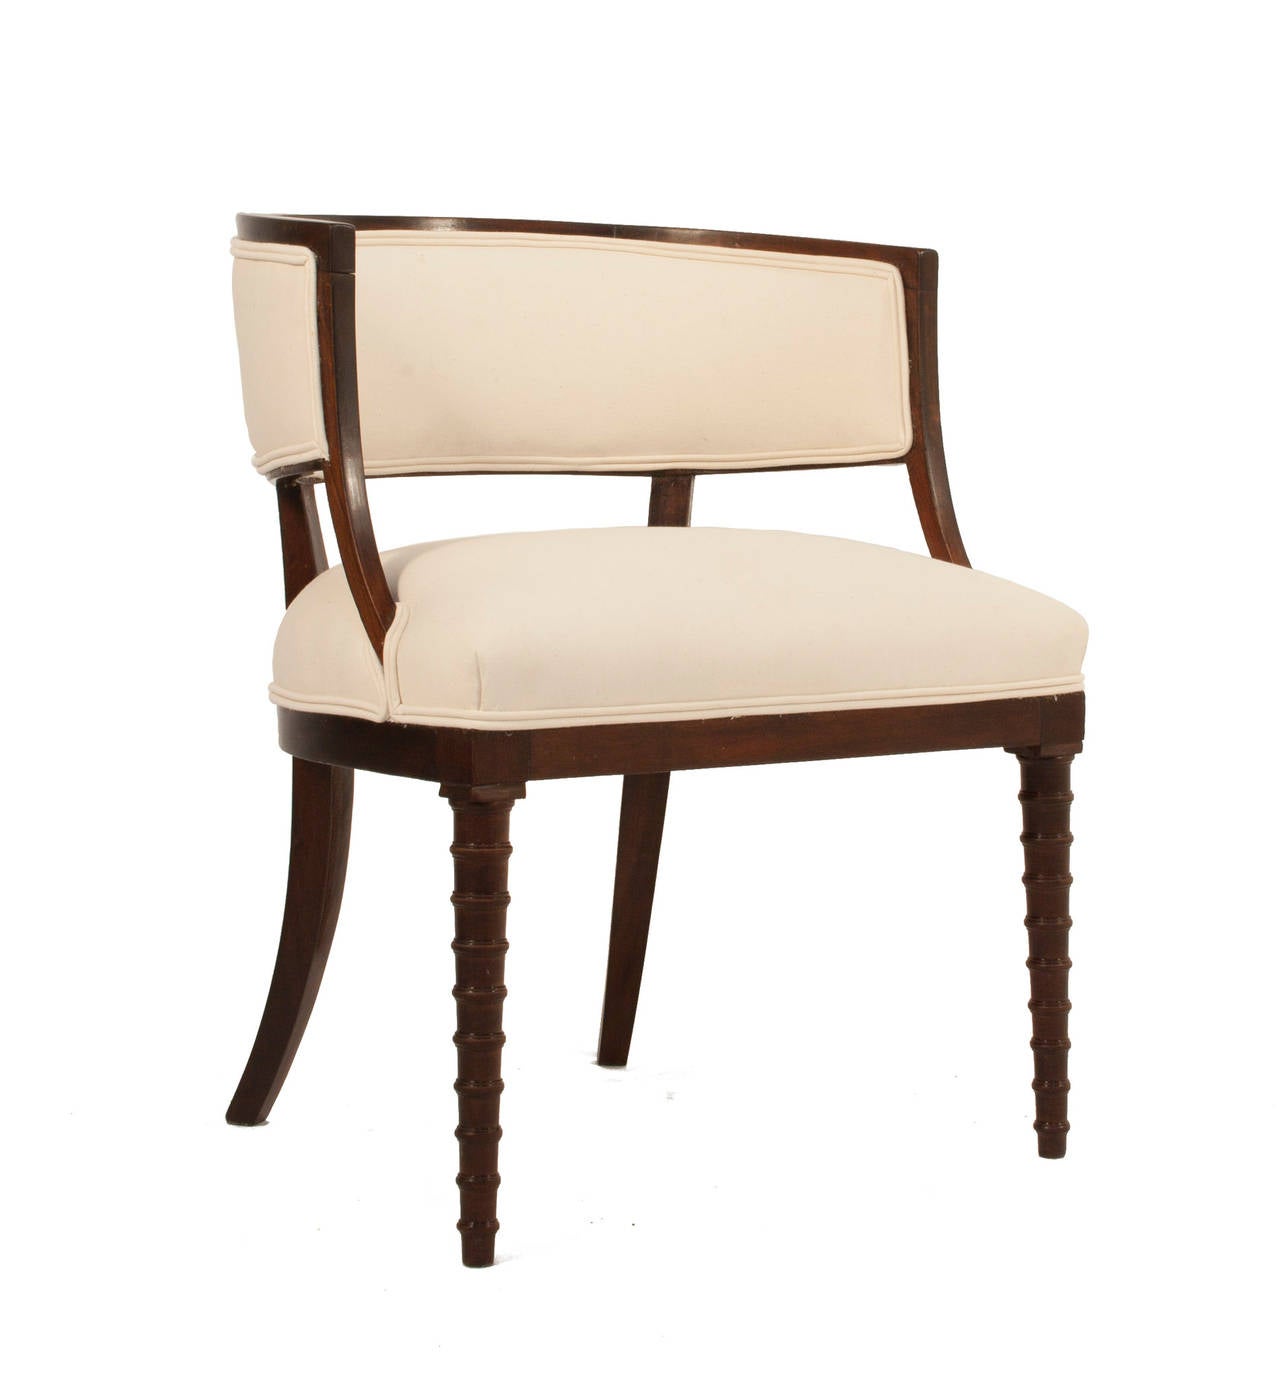 Pair of Gustavian bucket chairs in mahogany with front spindle legs.